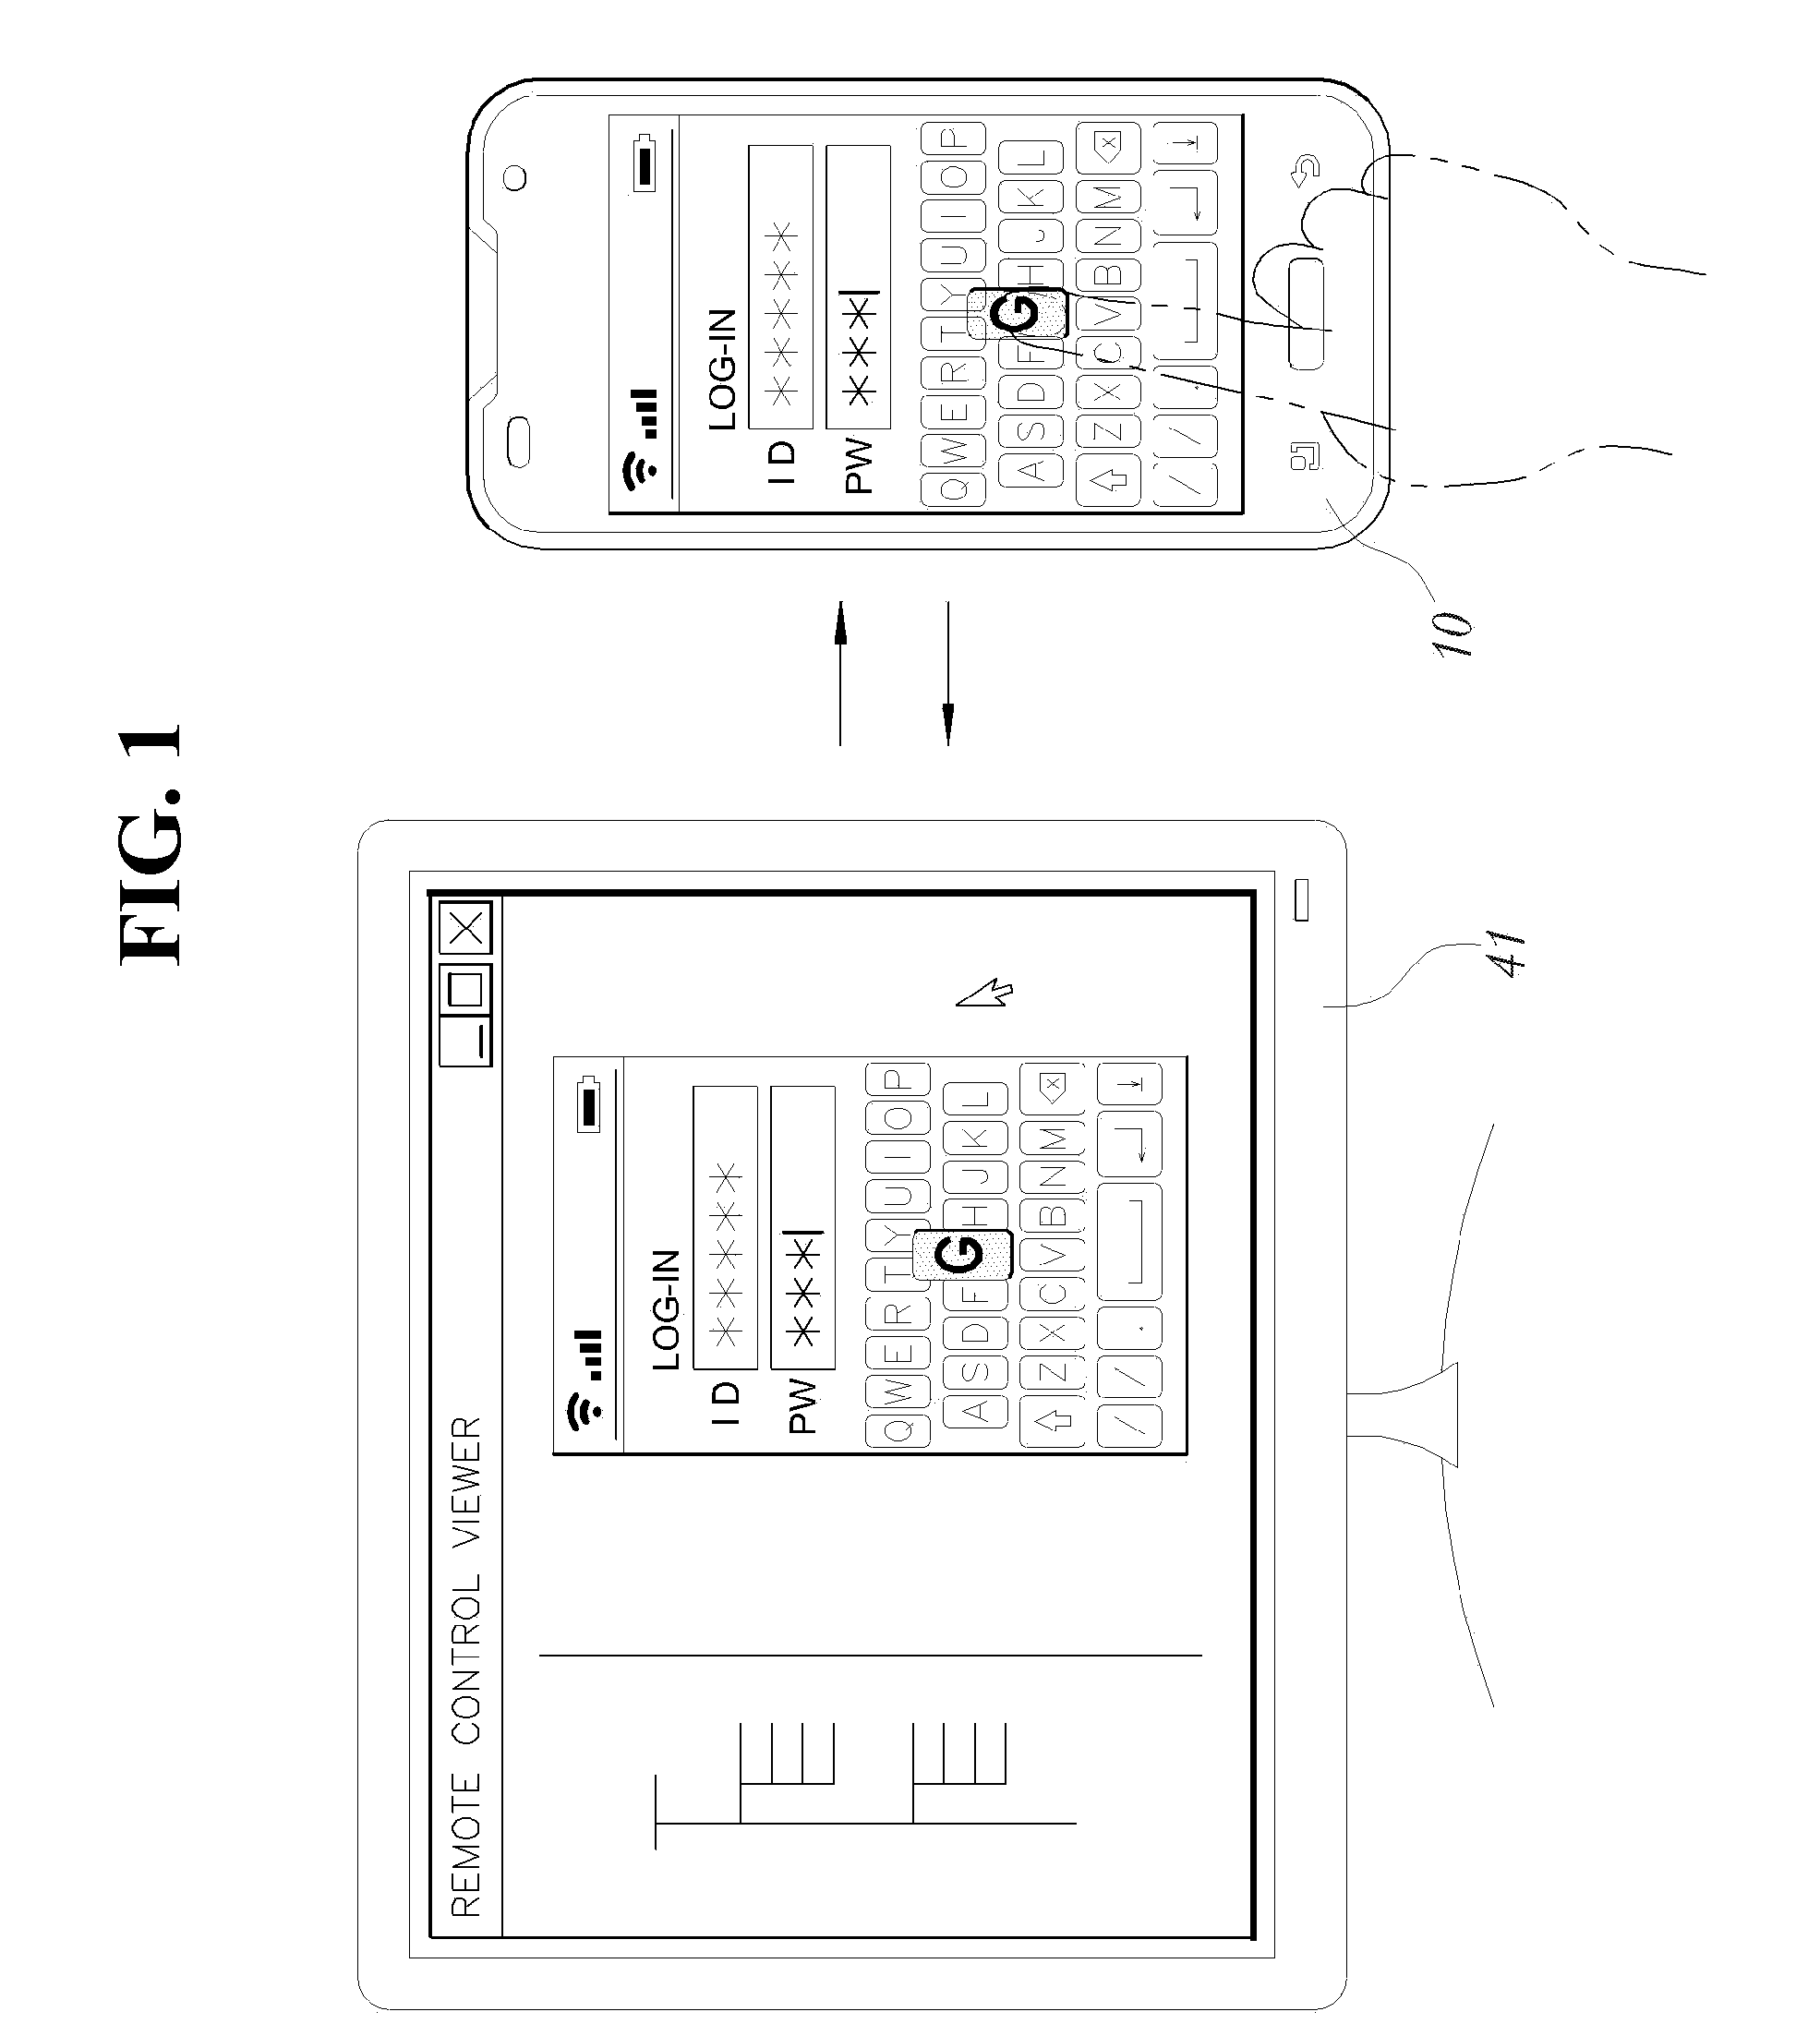 Method of blocking transmission of screen information of mobile communication terminal while performing remote control using icon